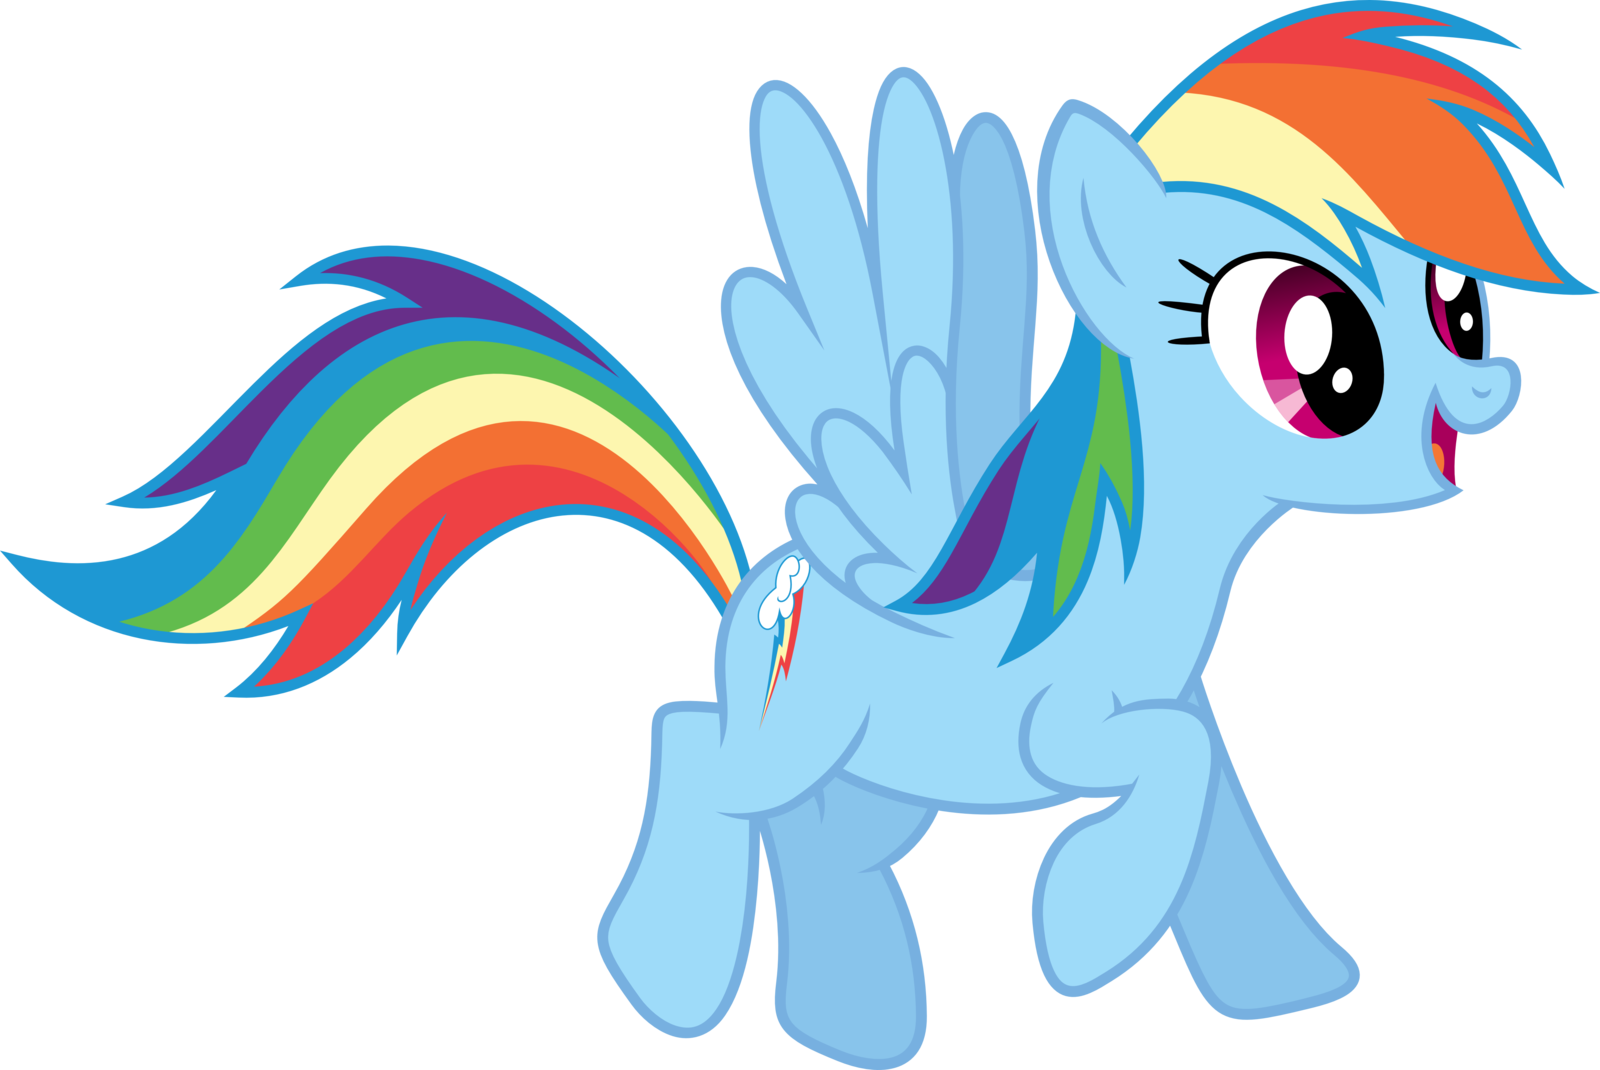 [Bild: FANMADE_Rainbow_Dash_vector_by_Xpesifeindx.png]